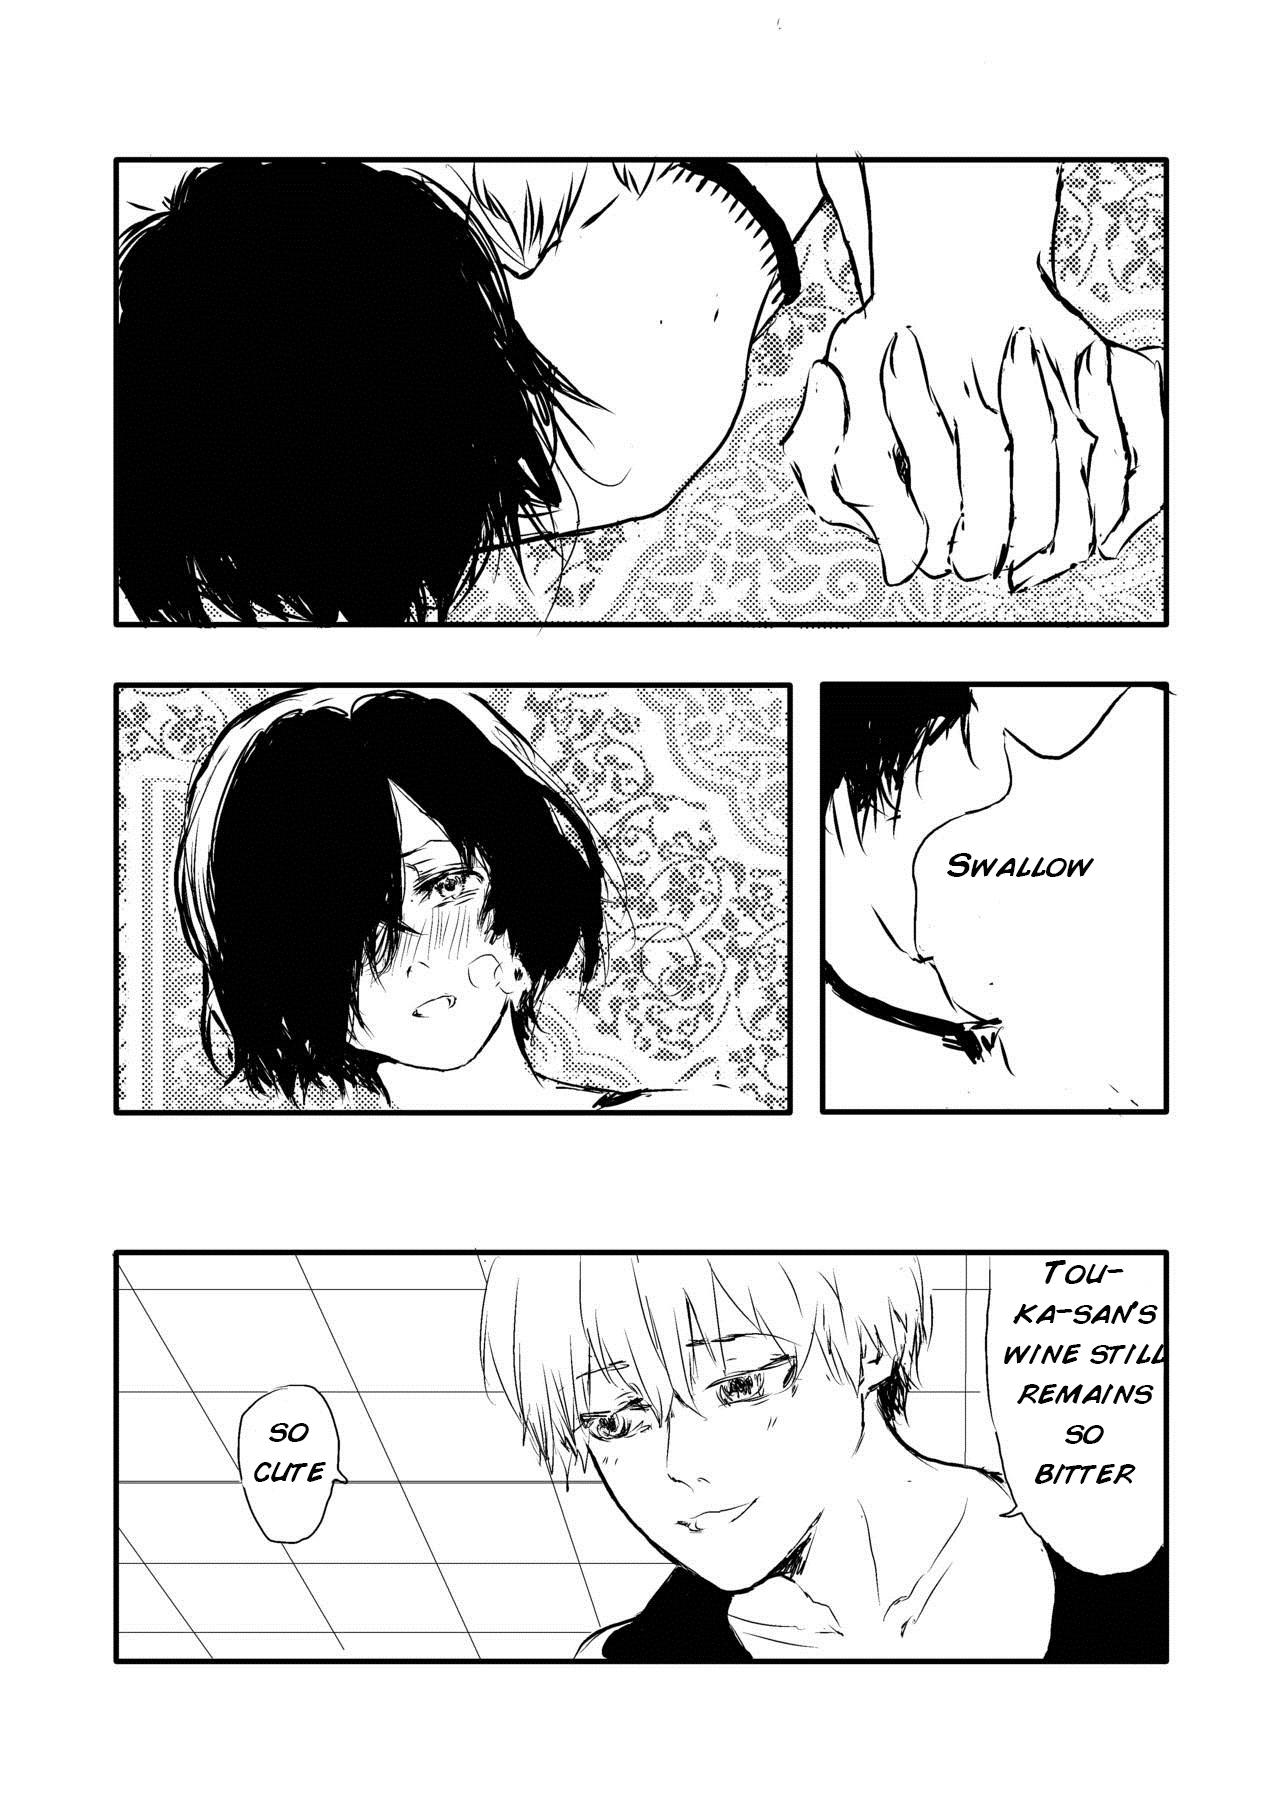 Deflowered Melt - Tokyo ghoul Interracial Sex - Page 4